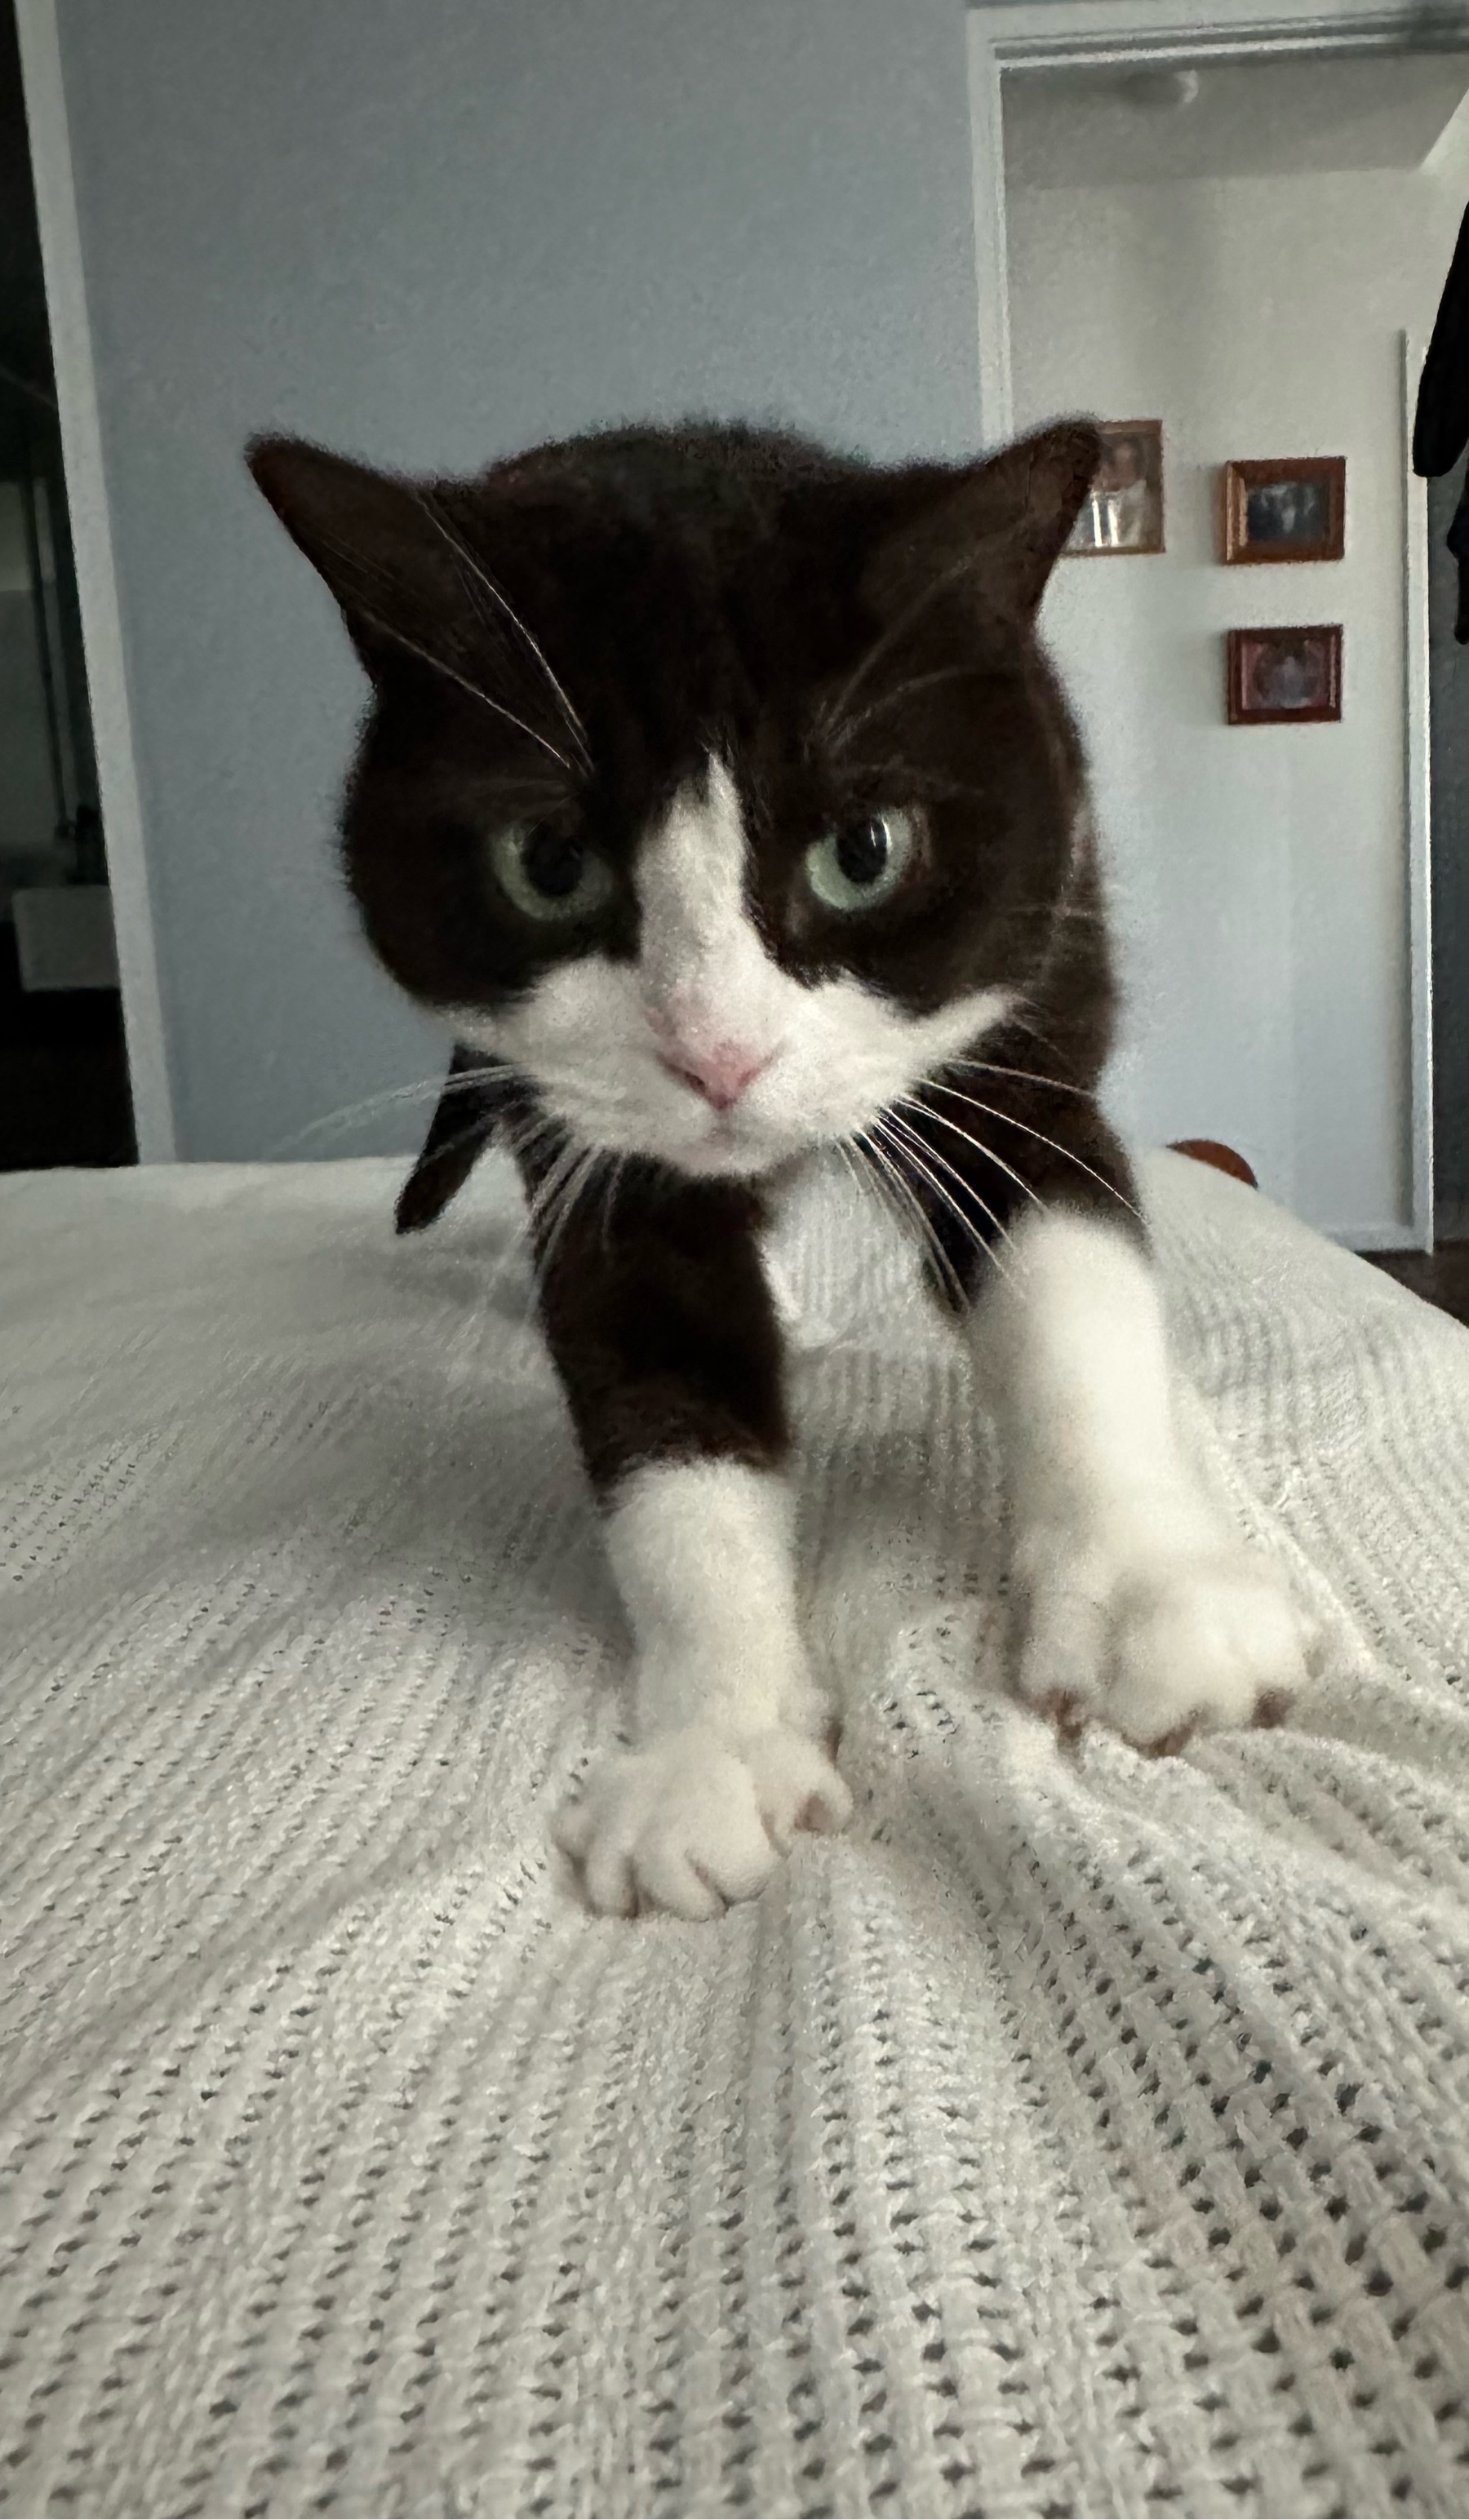 A black and white cat standing on a white blanket on the end of a bed, a blue wall behind. The cat has her front paws outstretched and is starting to walk towards the camera looking grumpy.